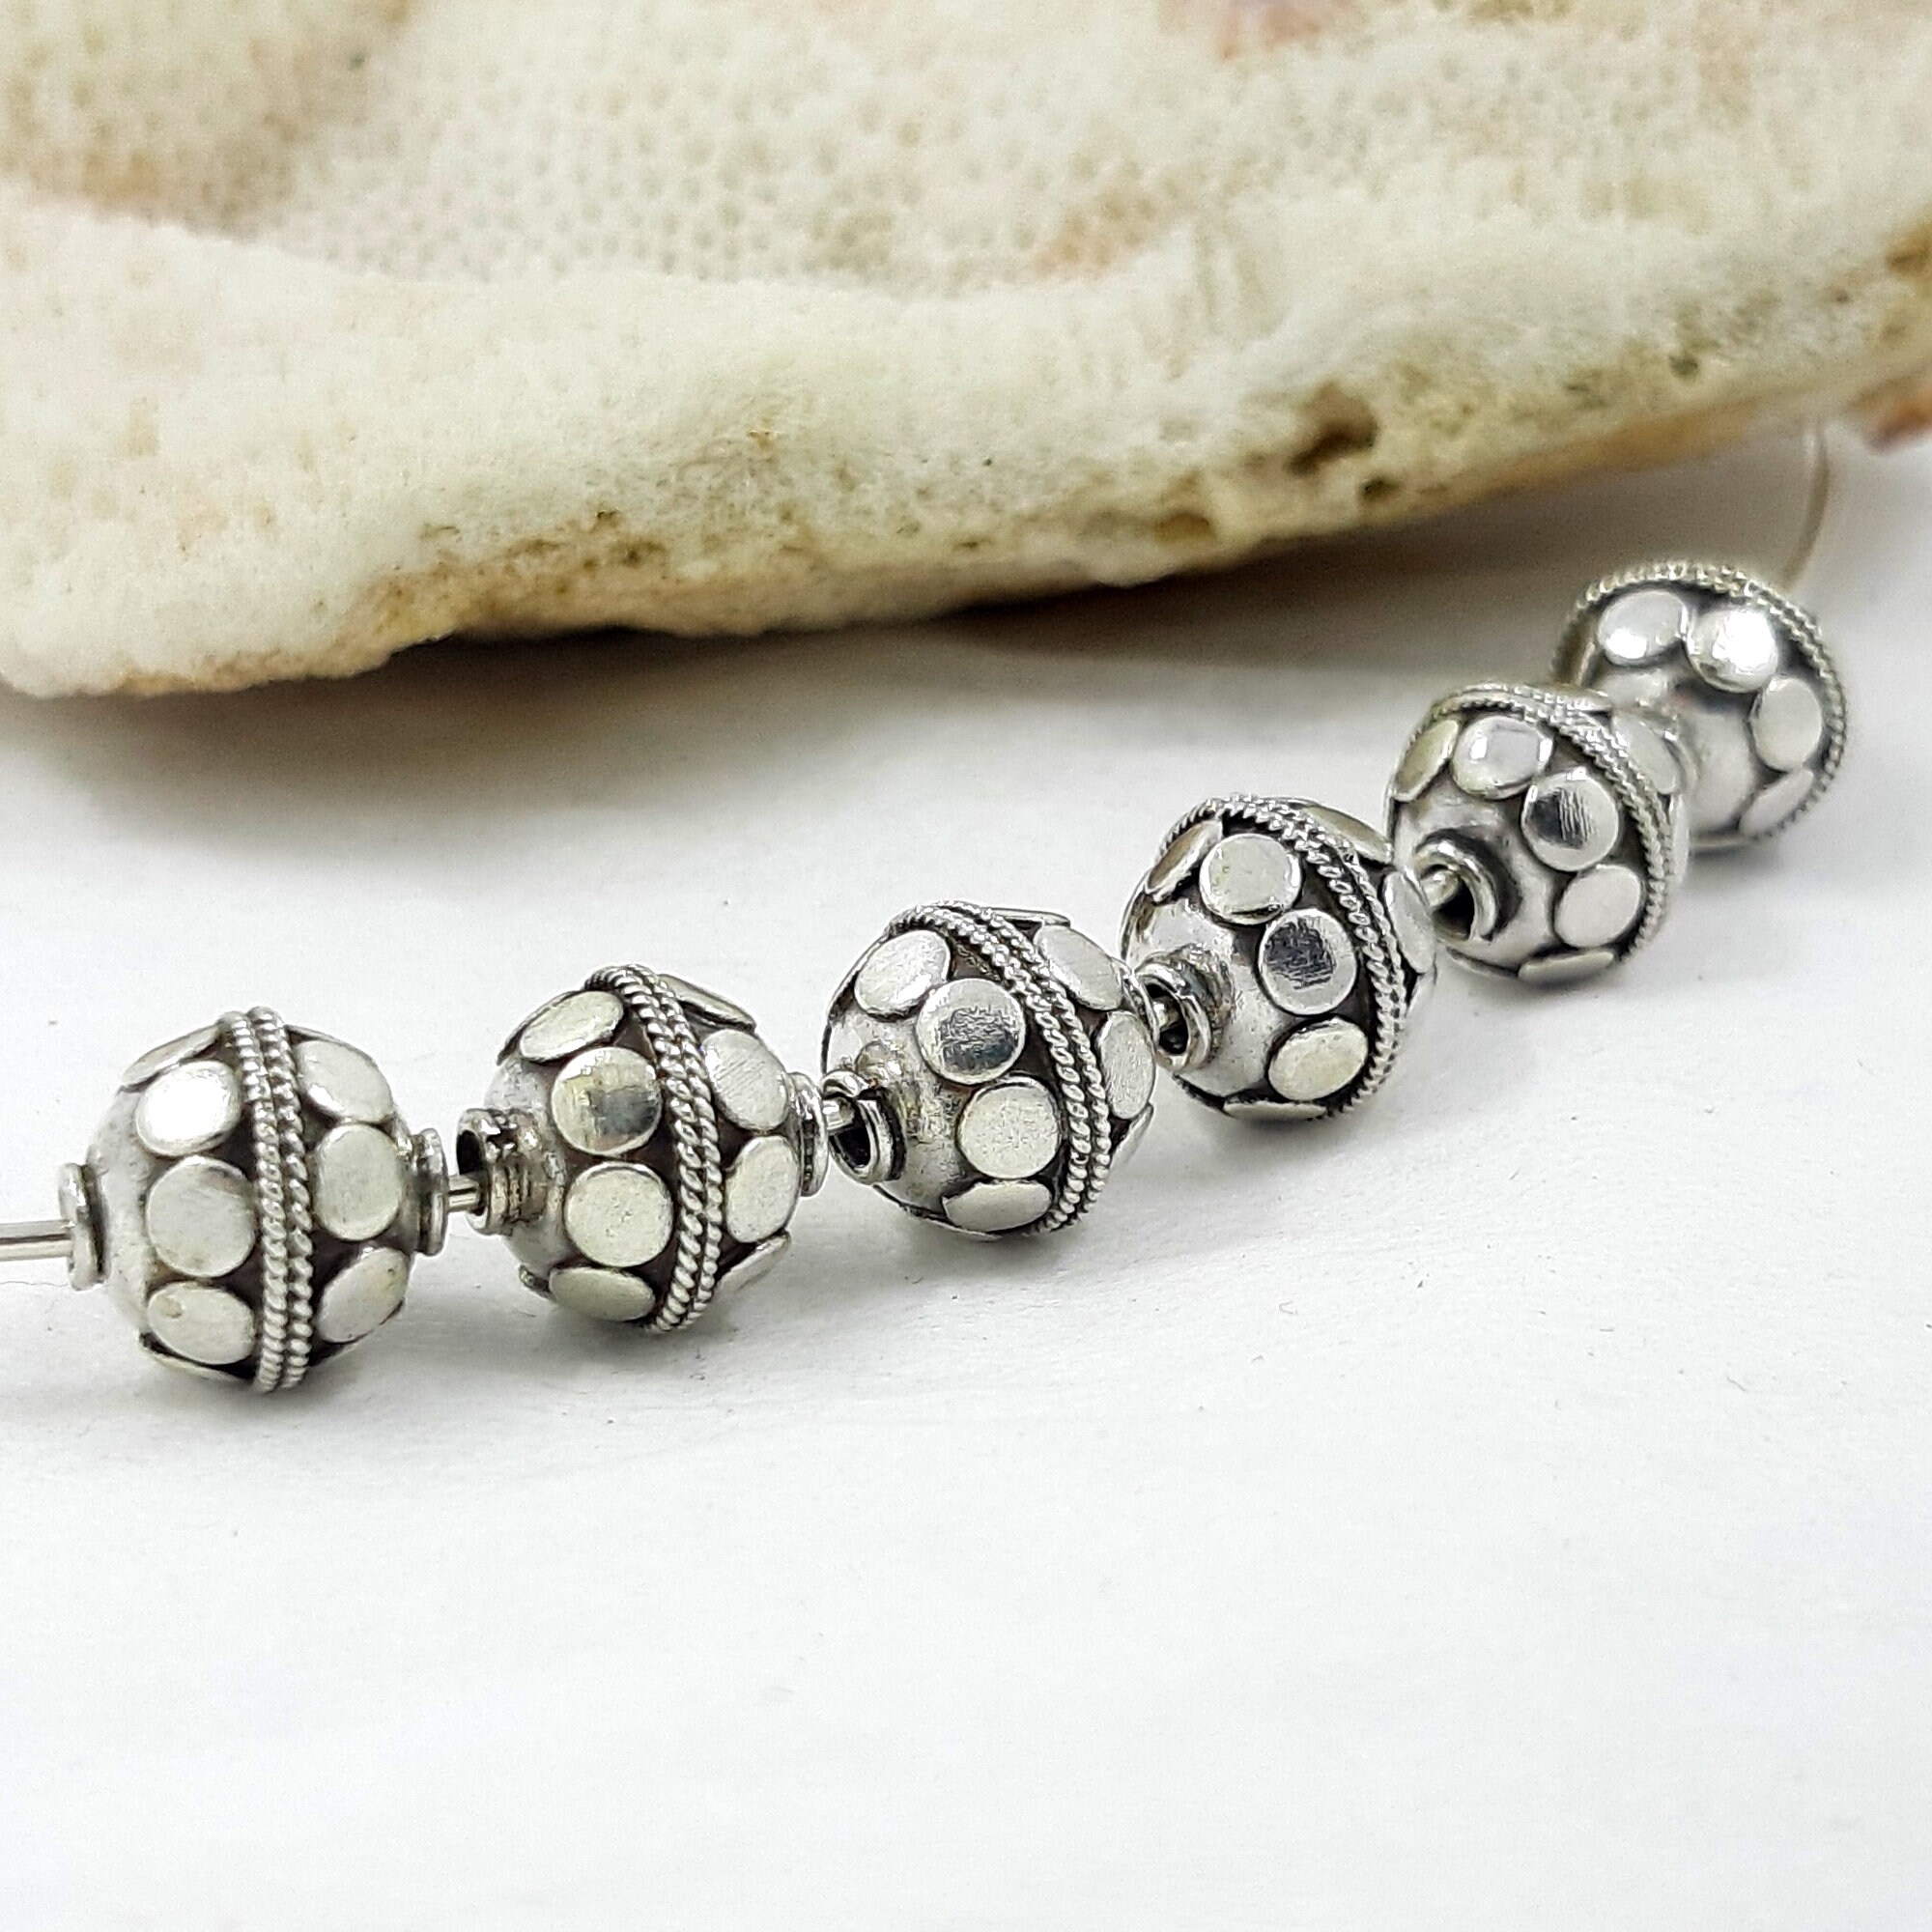 5 Pcs Bag of 8 mm Sterling Silver Seamless Round Beads